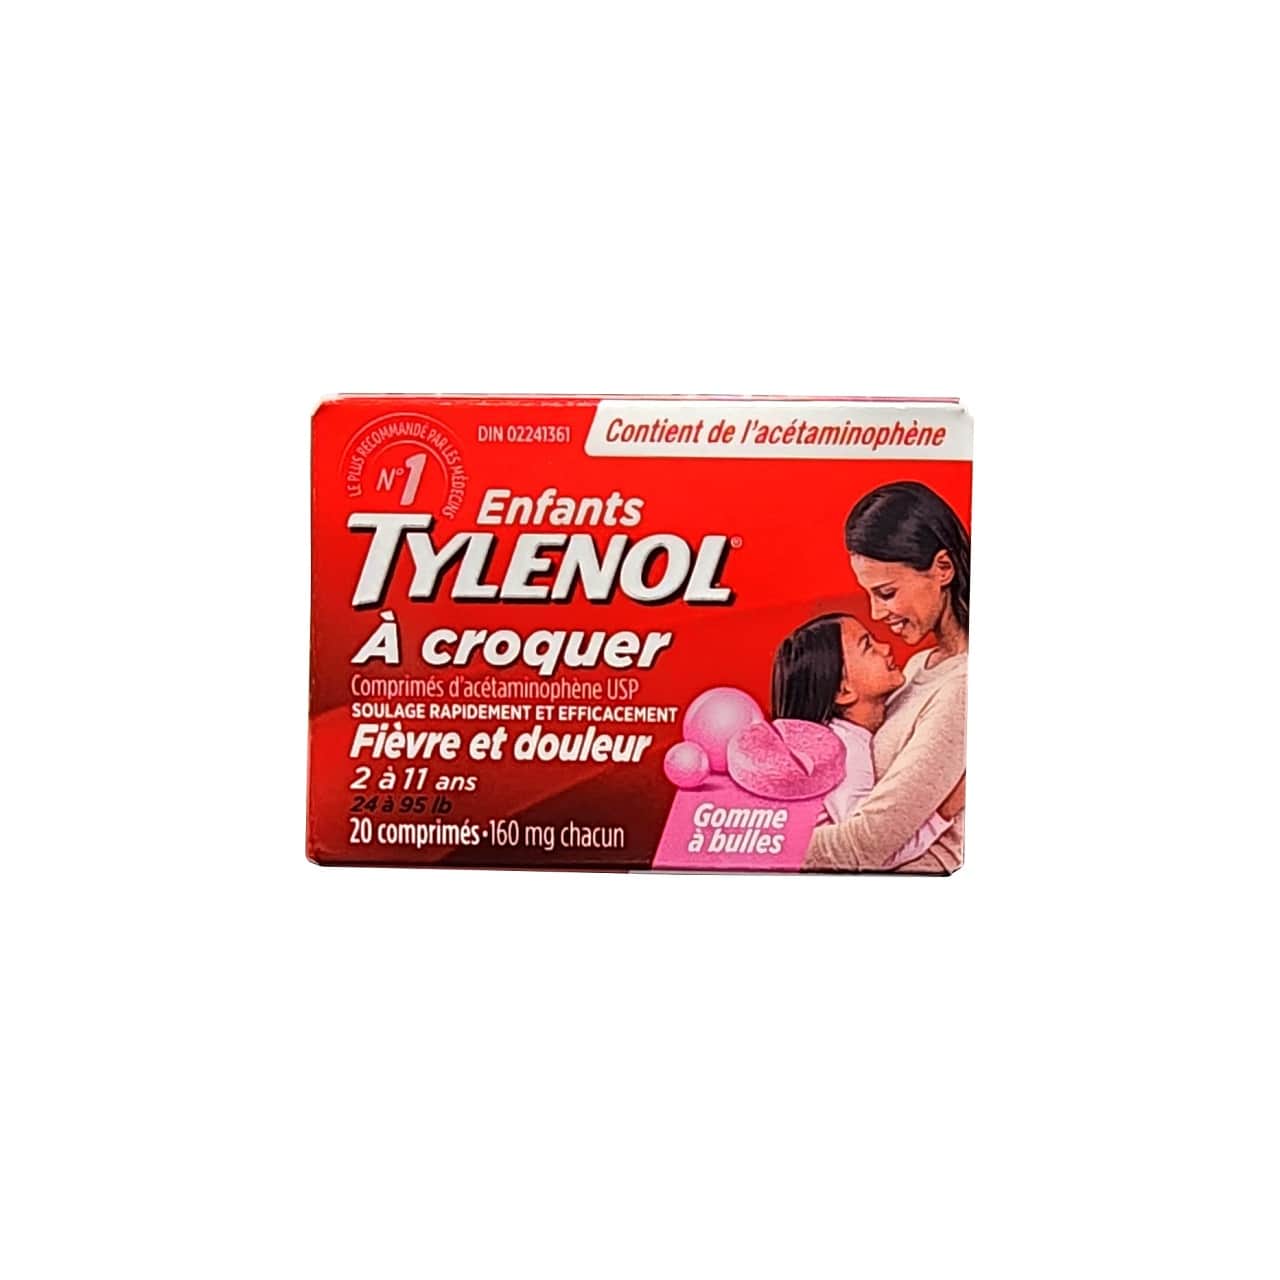 Product label for Children's Tylenol Acetaminophen Fever and Pain Chewables Bubble Gum (Ages 2-11) (20 tablets) in French